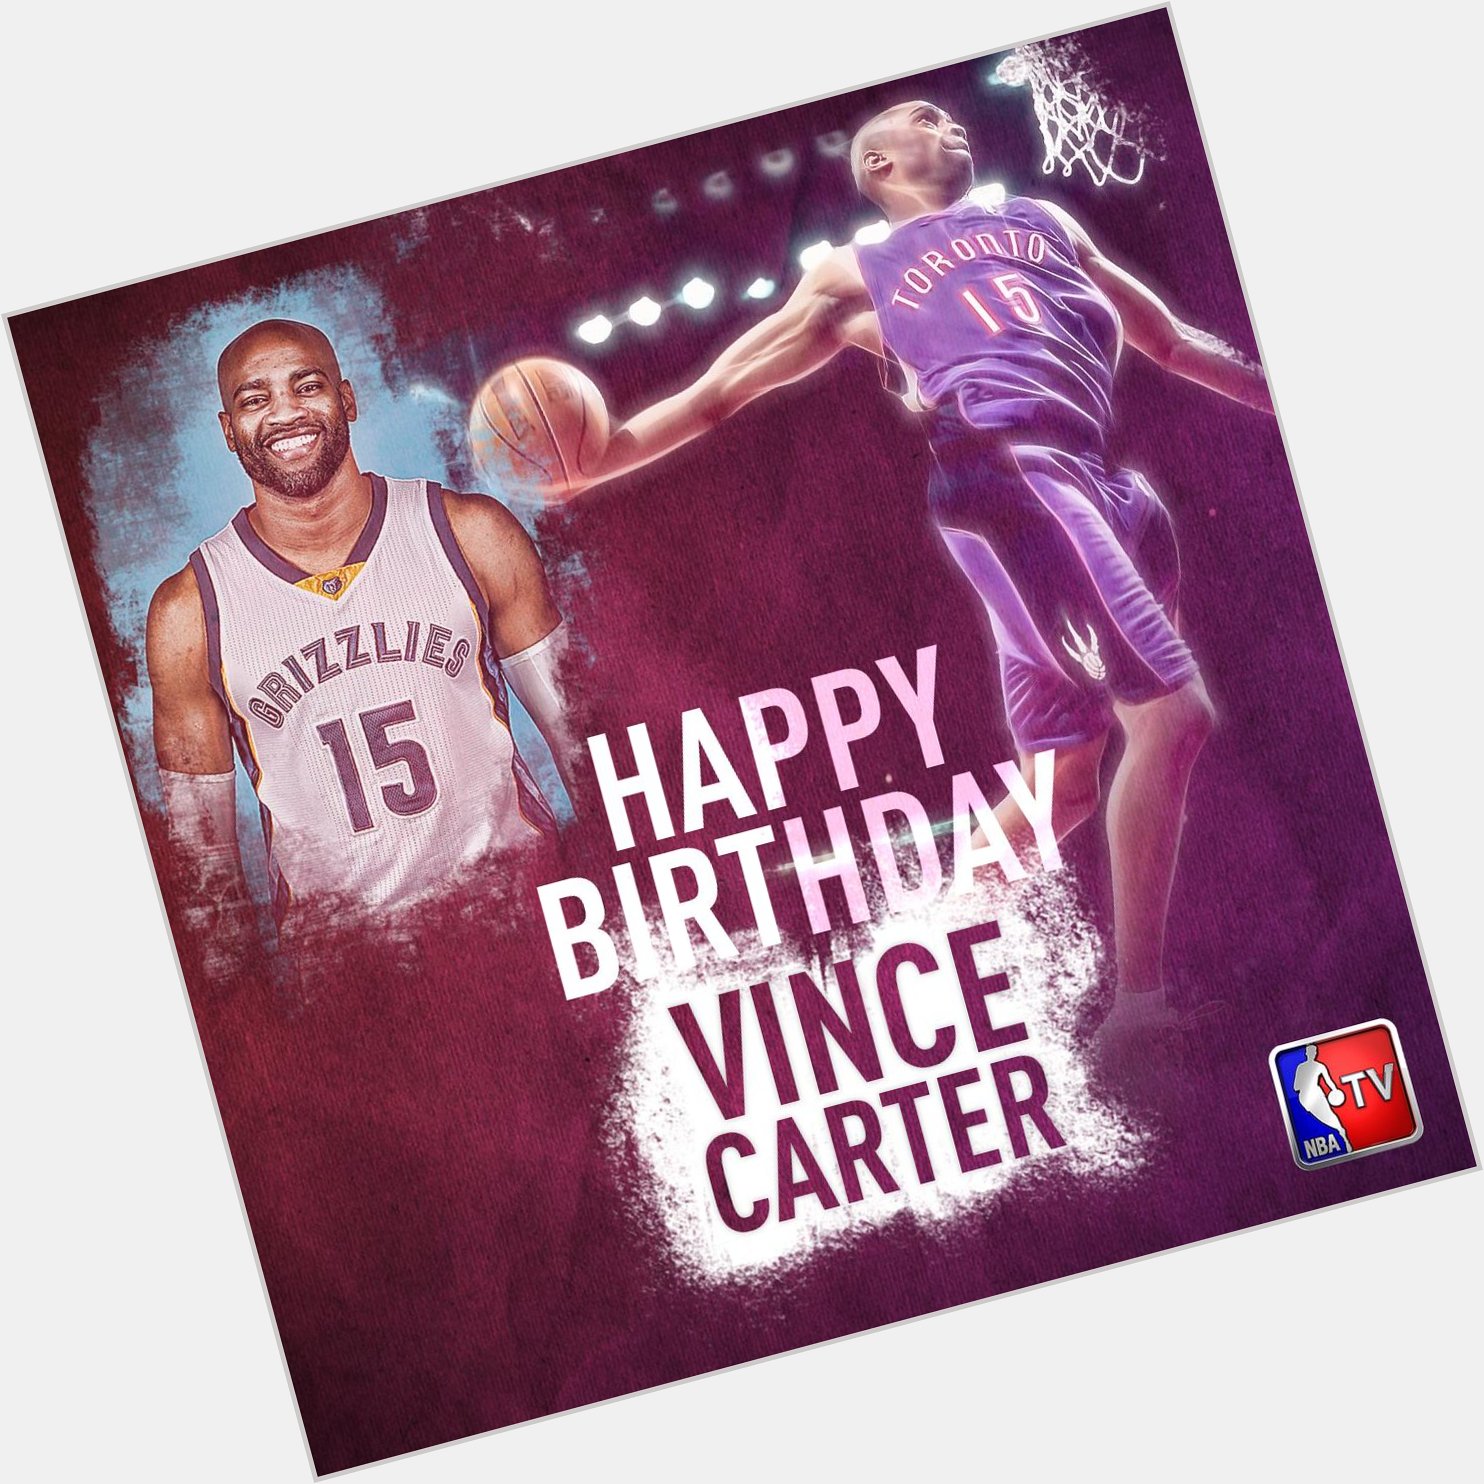 Happy Birthday to Vince Carter! 